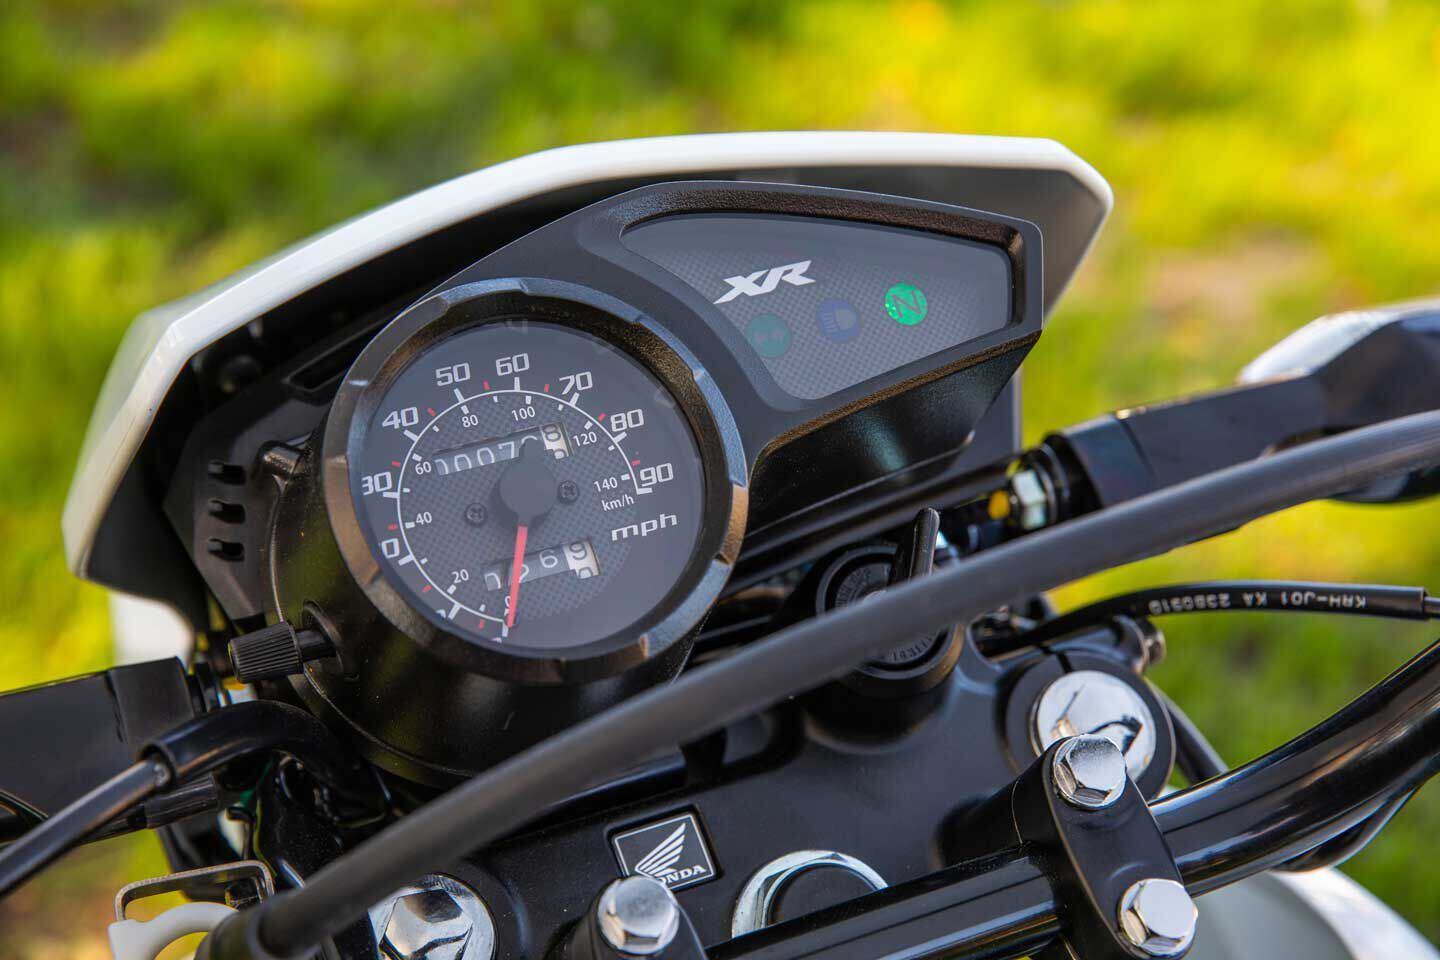 Keeping things simple and cost effective, the Honda XR150L features an analog speedometer, odometer, and tripmeter.